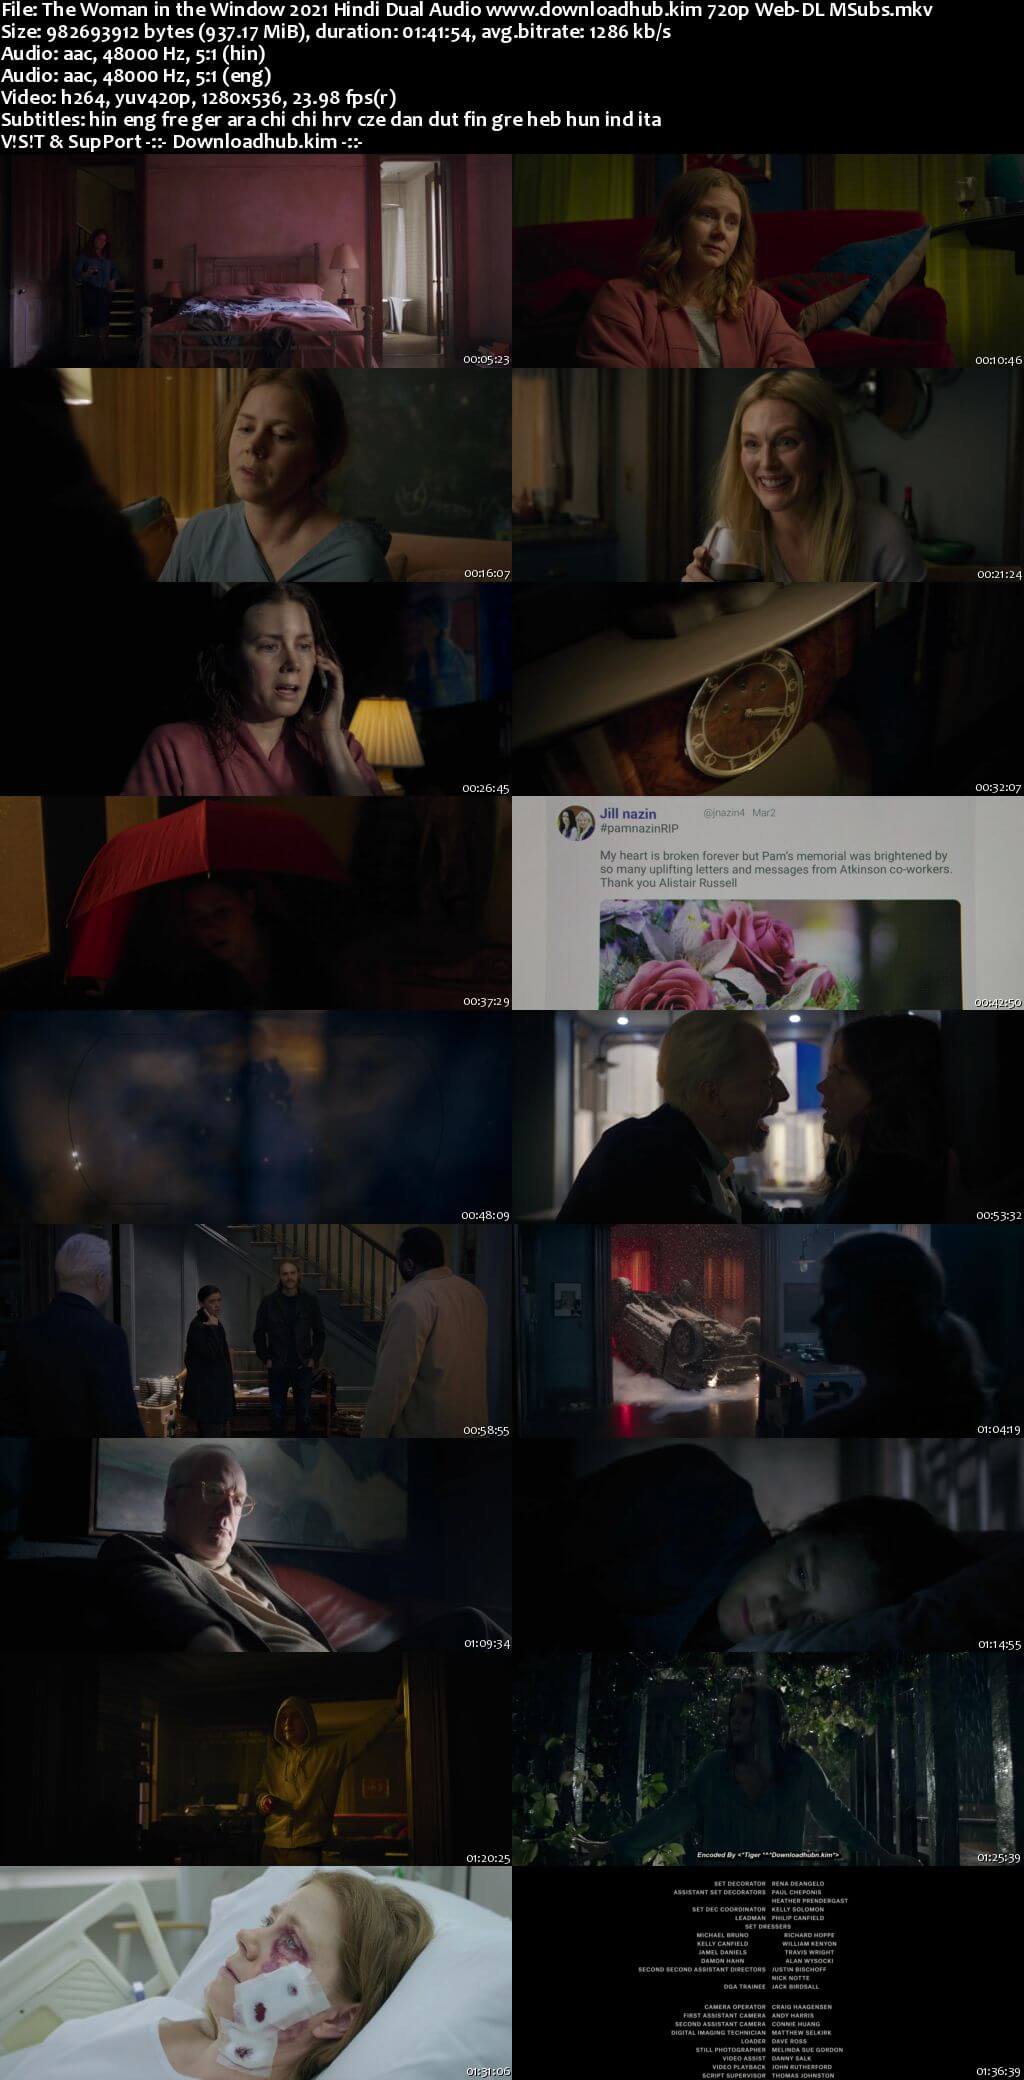 The Woman in the Window 2021 Hindi Dual Audio 720p Web-DL MSubs